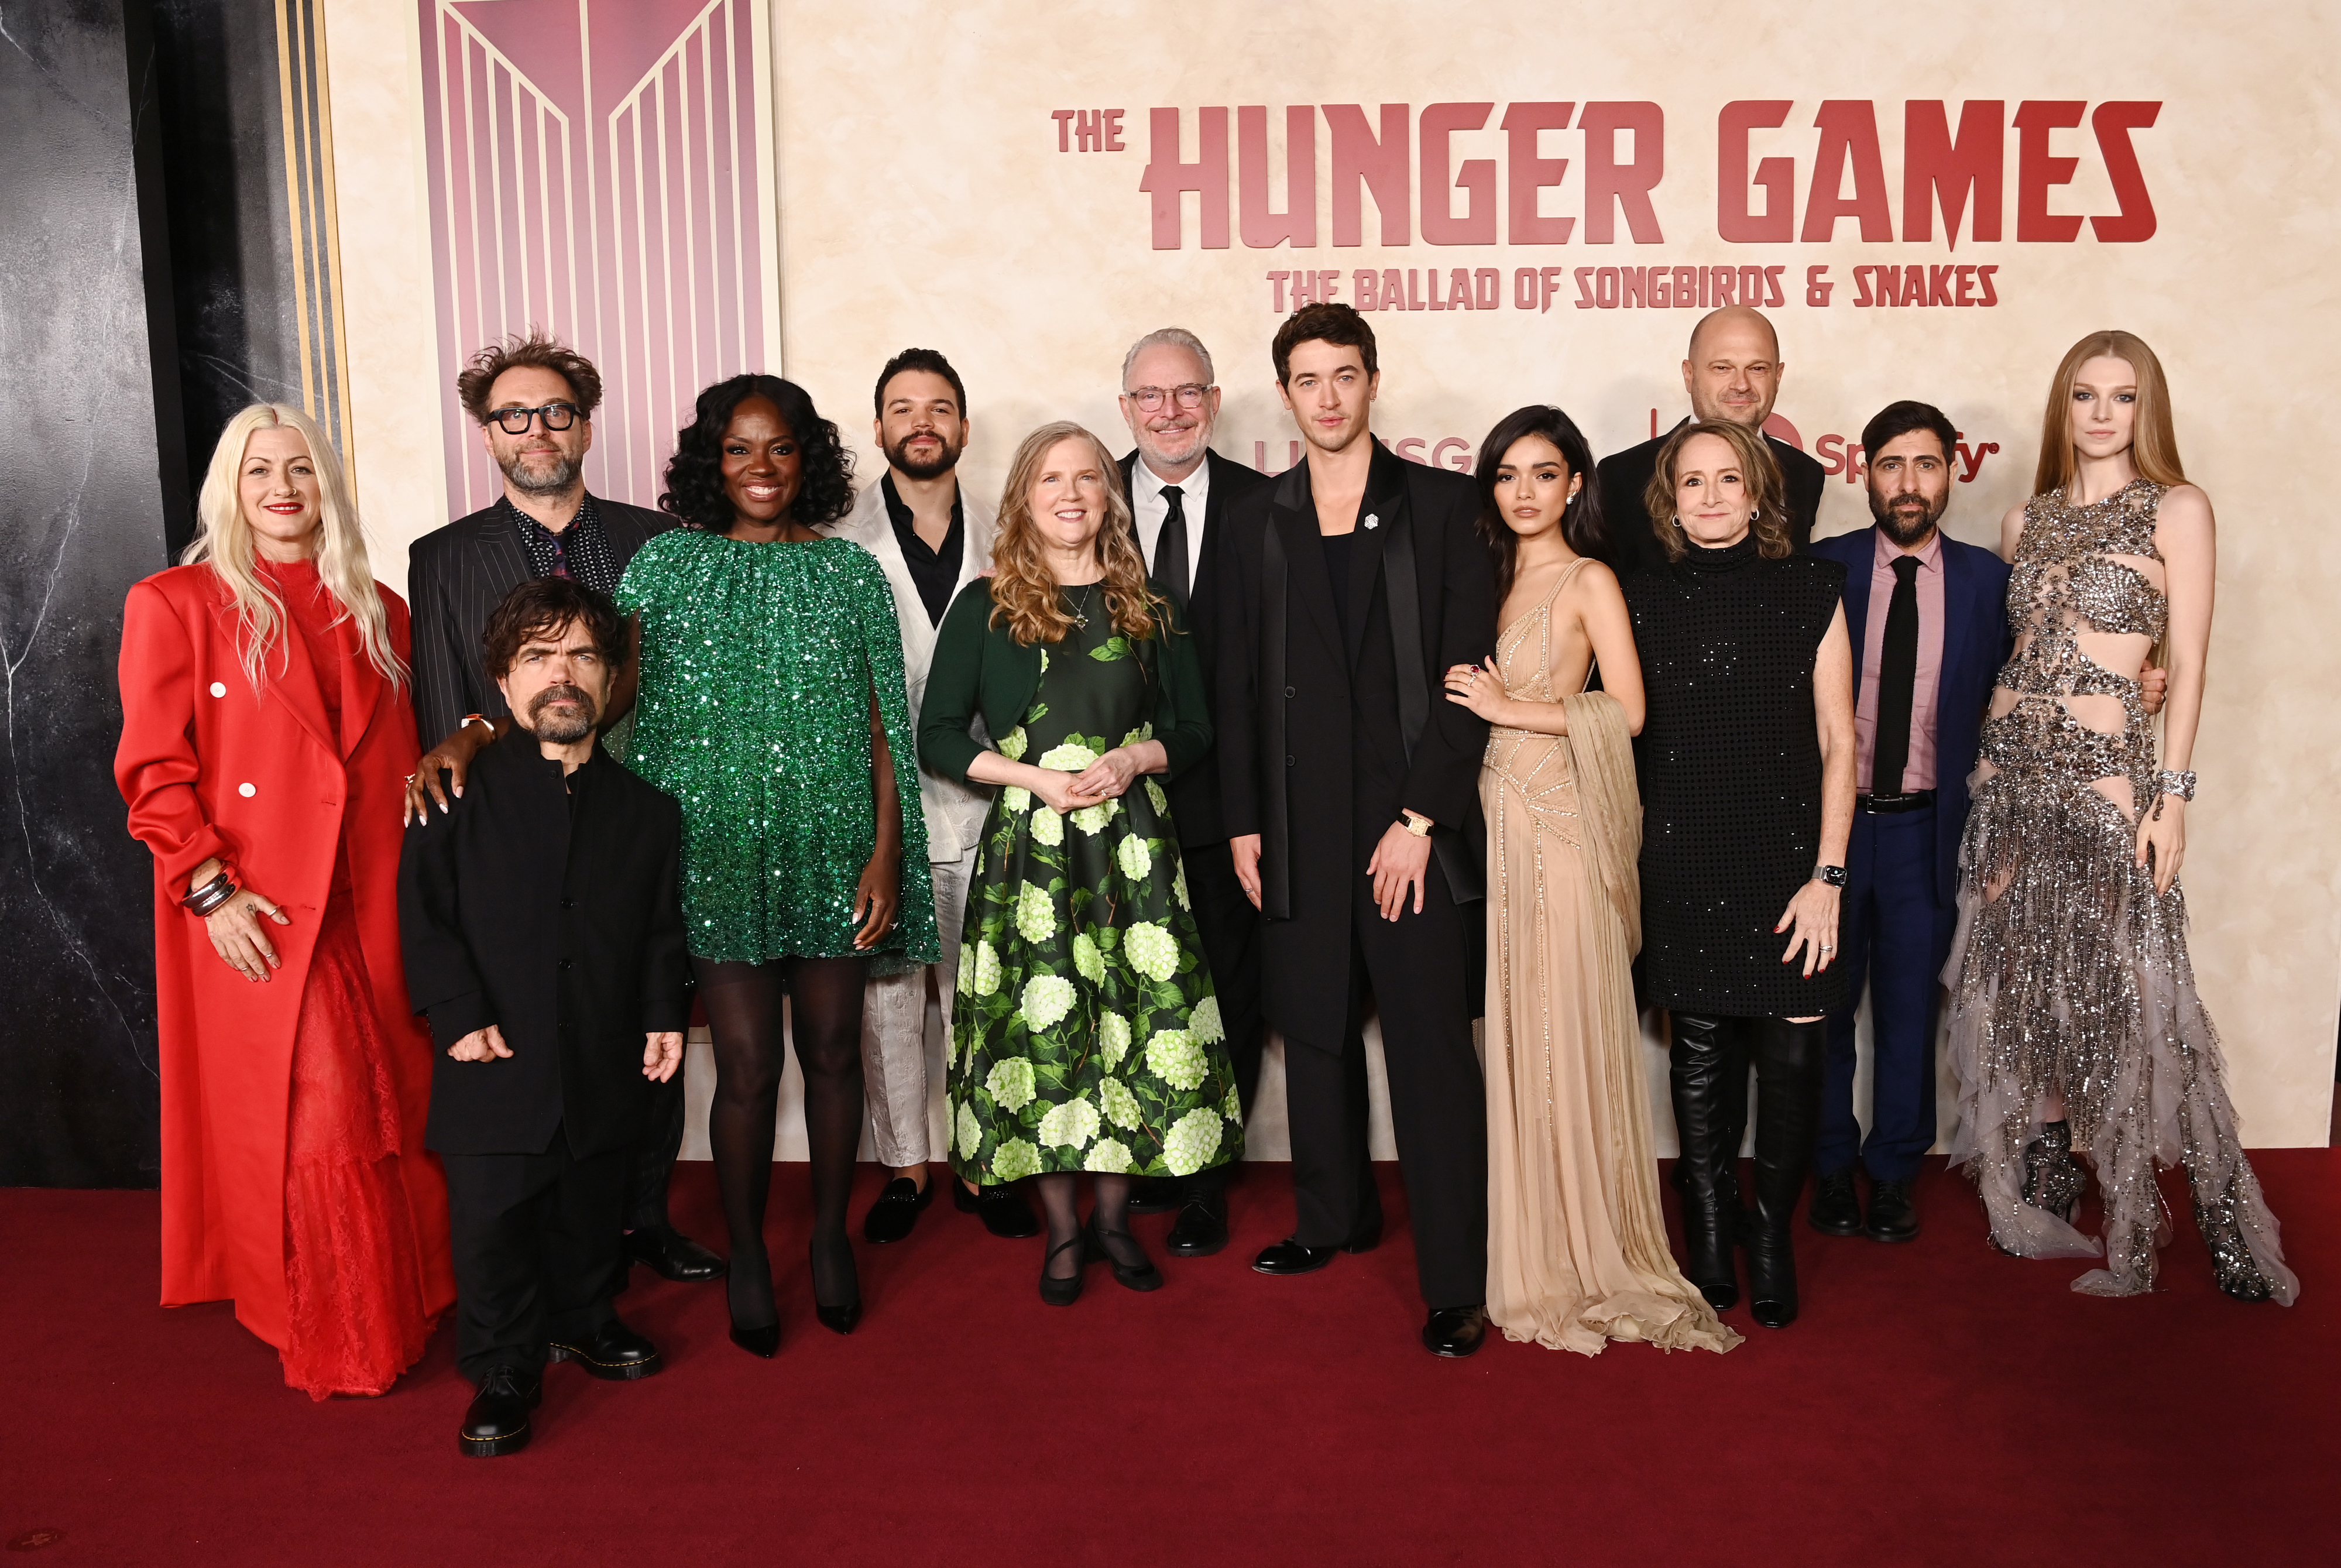 the cast on the red carpet